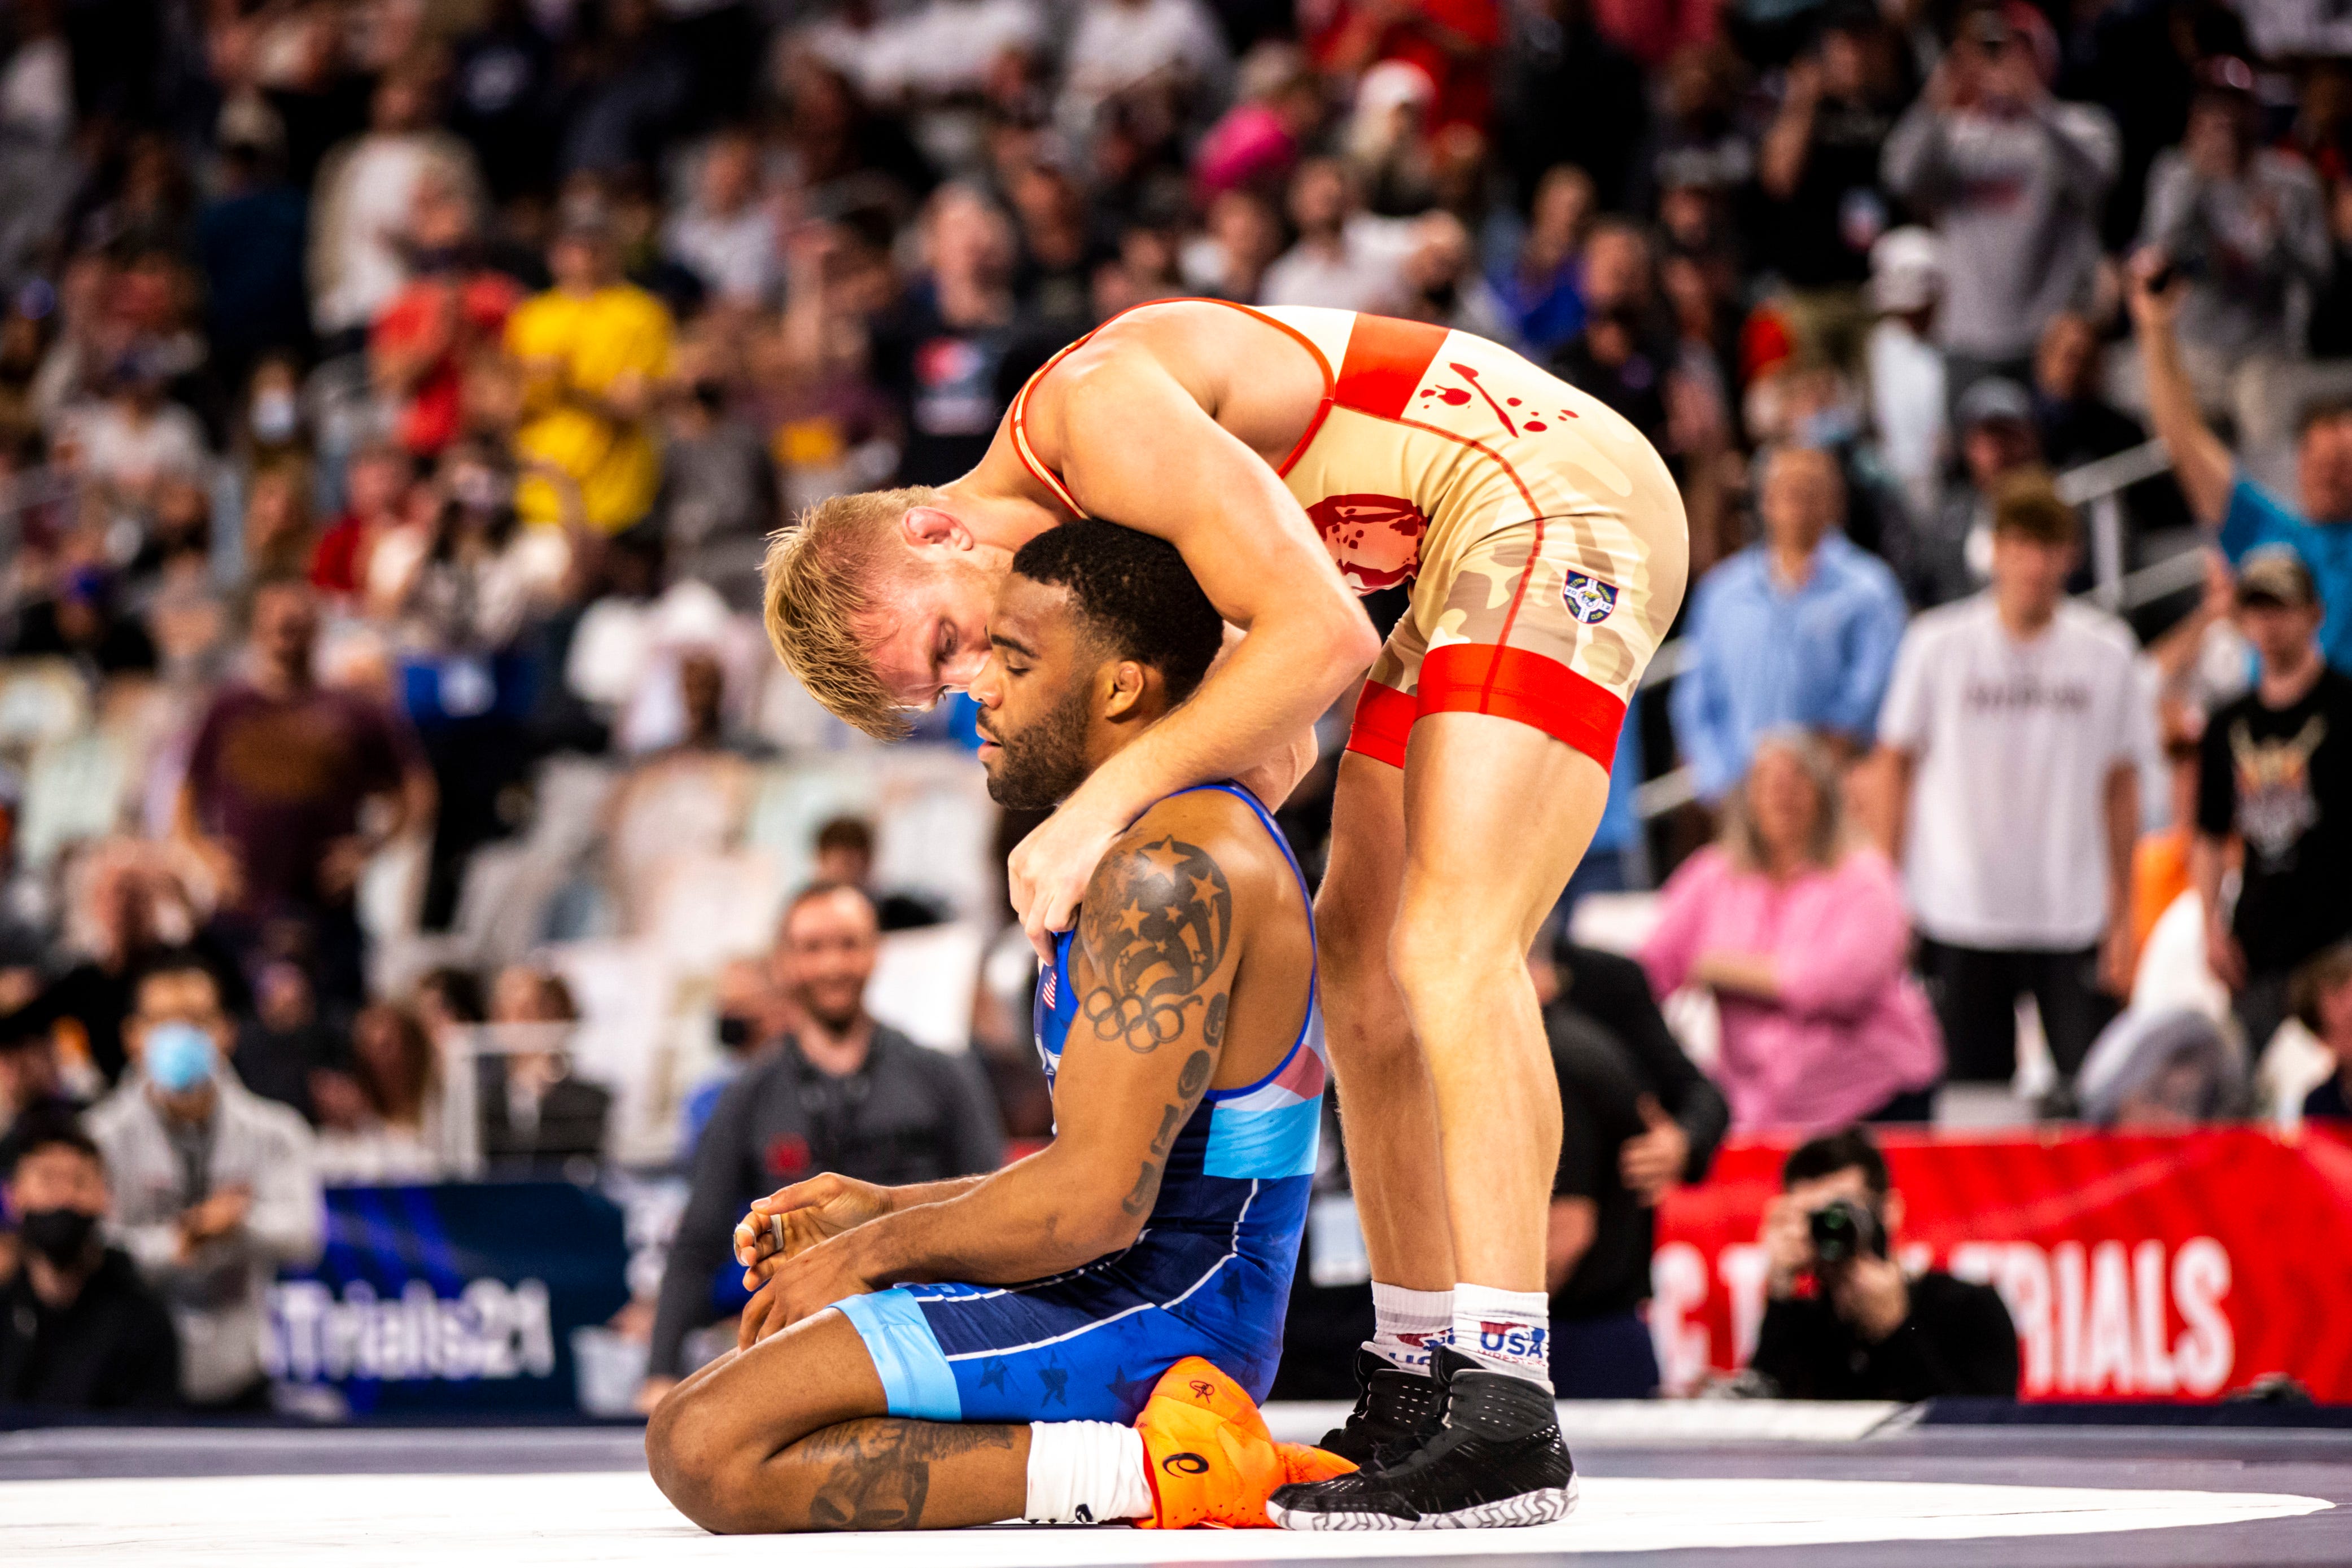 Olympic Wrestling Trials Recap from Saturday's championship finals